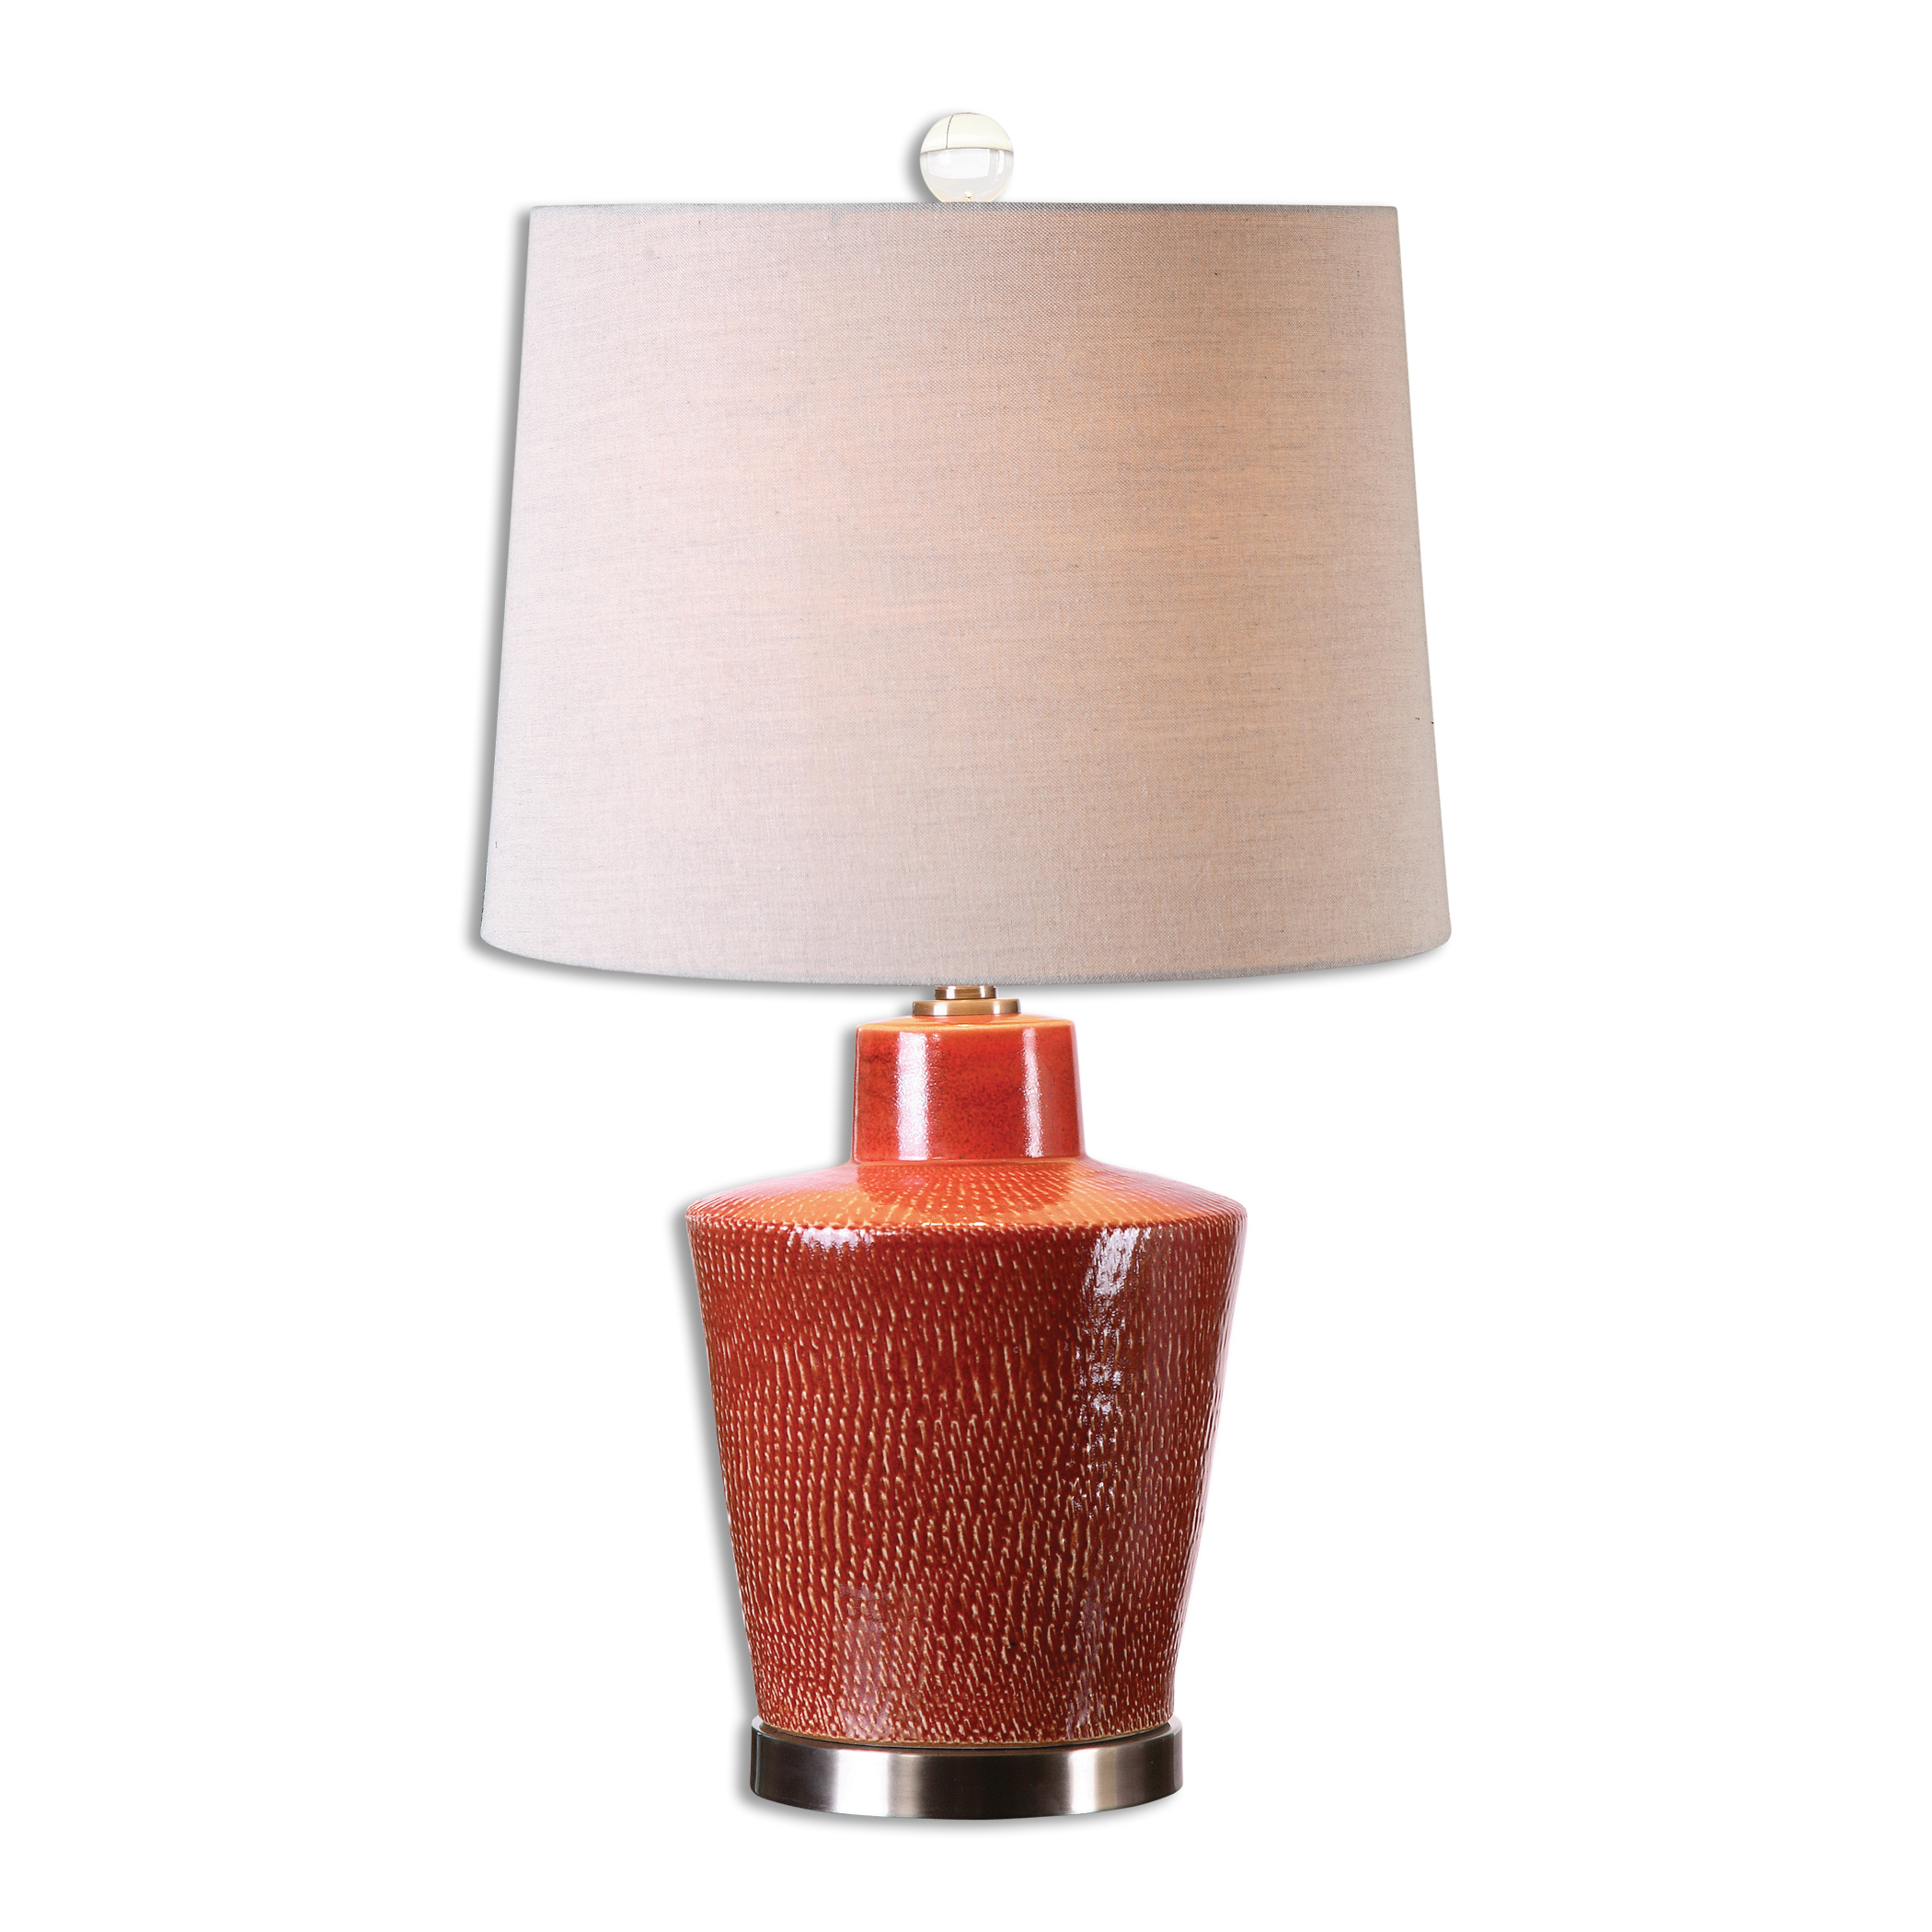 Online Designer Home/Small Office Cornell Brick Red Table Lamp